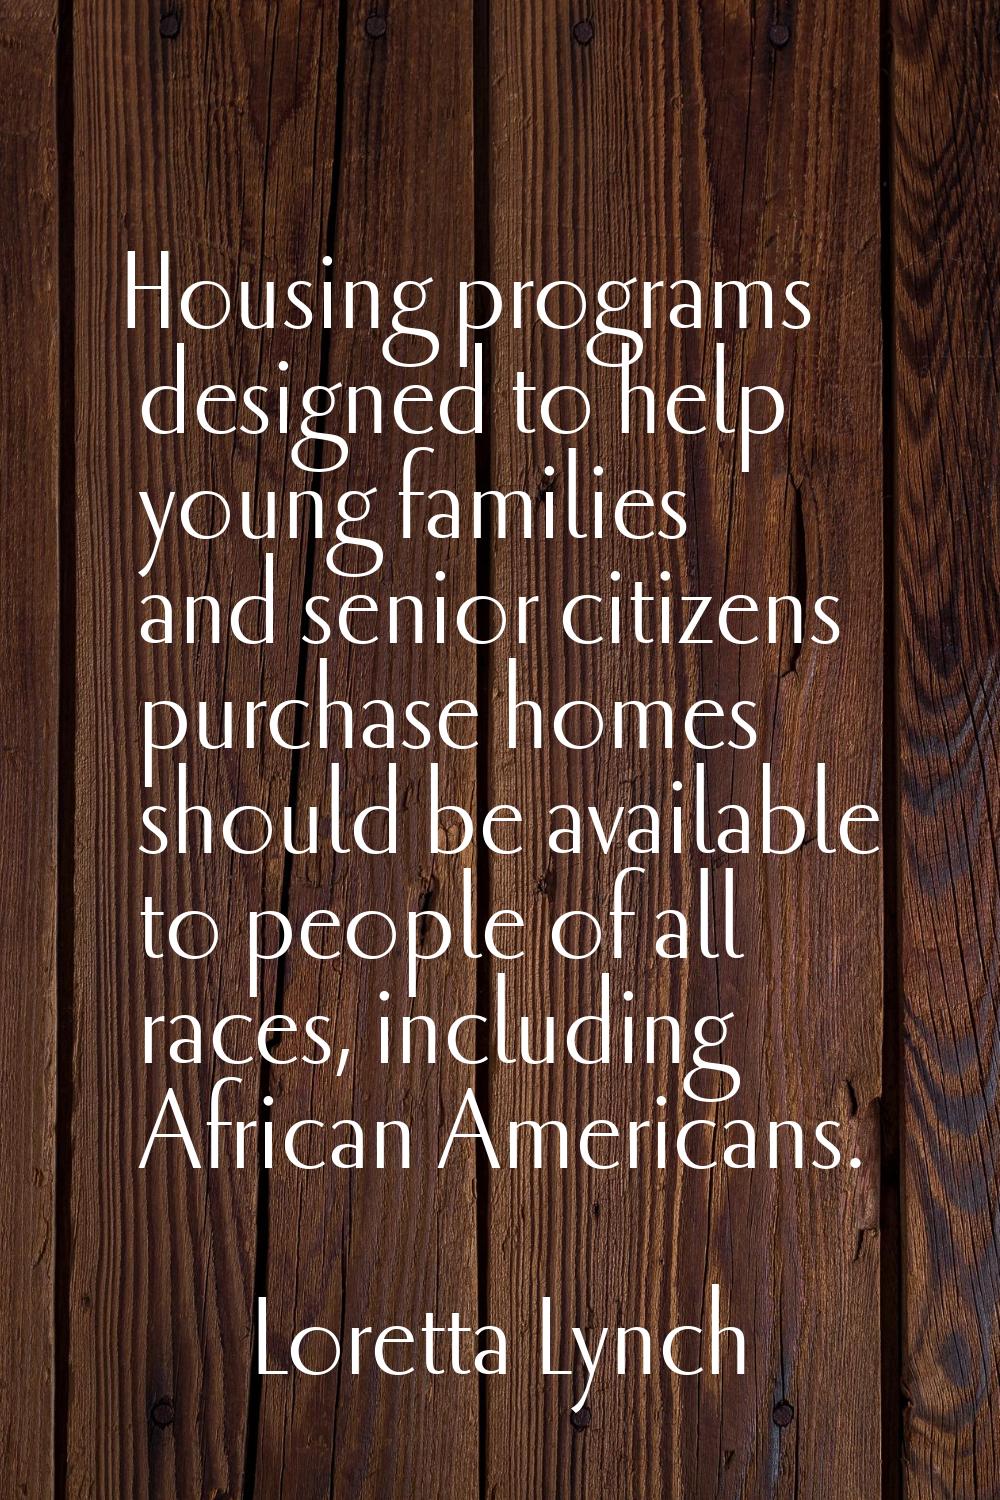 Housing programs designed to help young families and senior citizens purchase homes should be avail